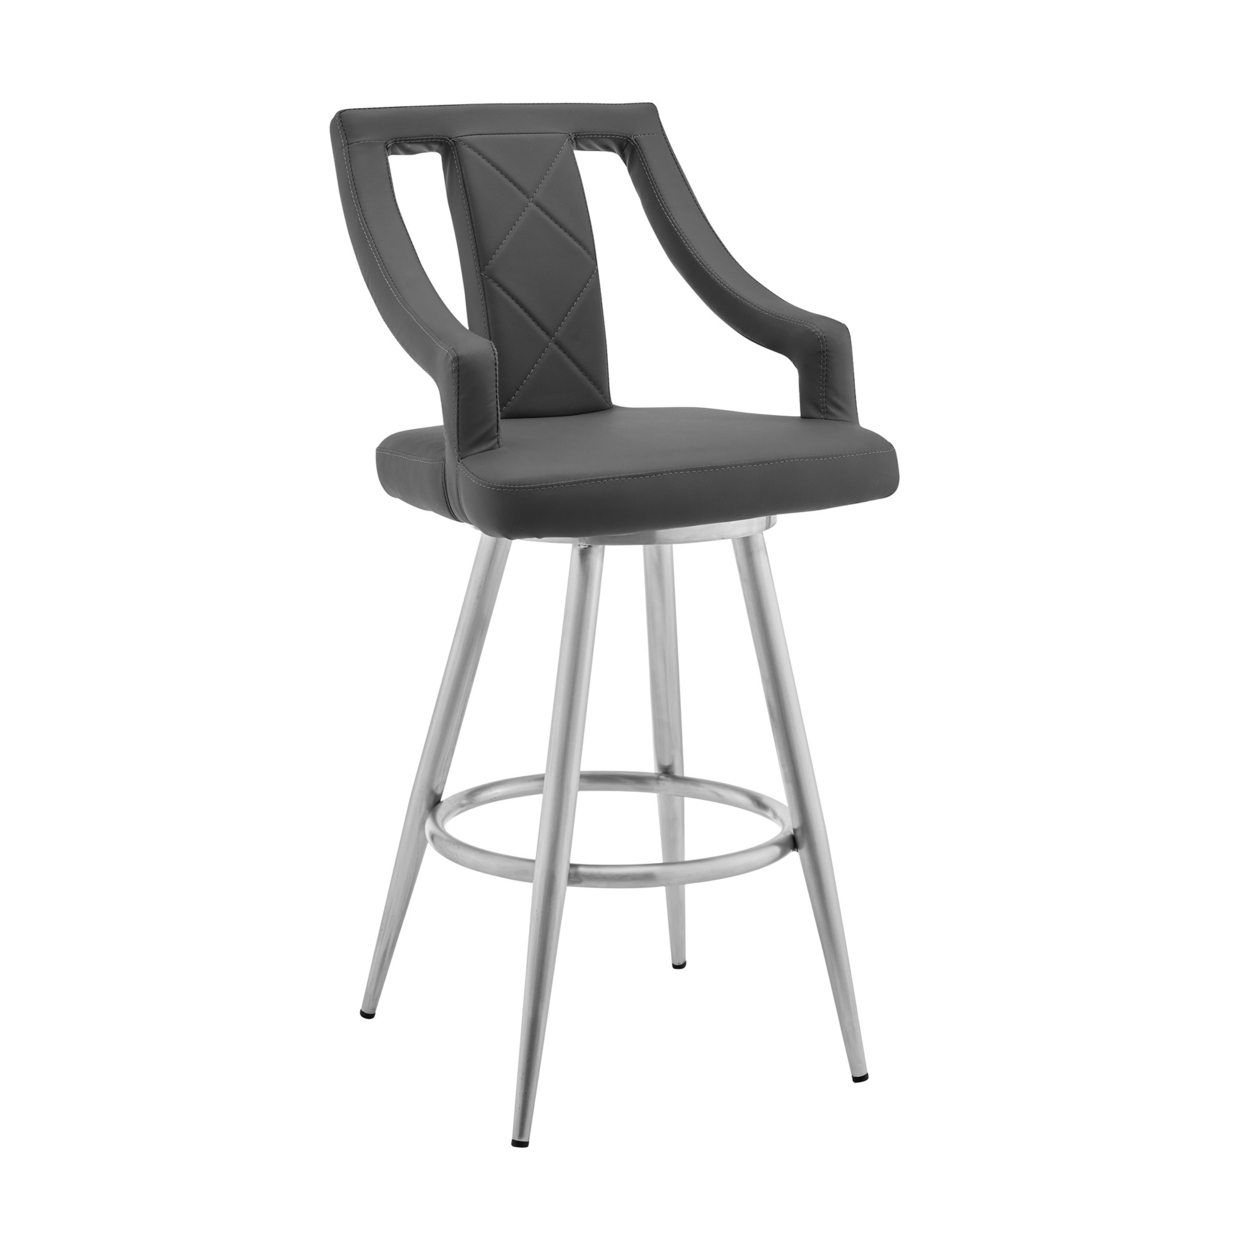 Maxen 26 Gray Faux Leather And Brushed Stainless Steel Swivel Bar Stool- Saltoro Sherpi